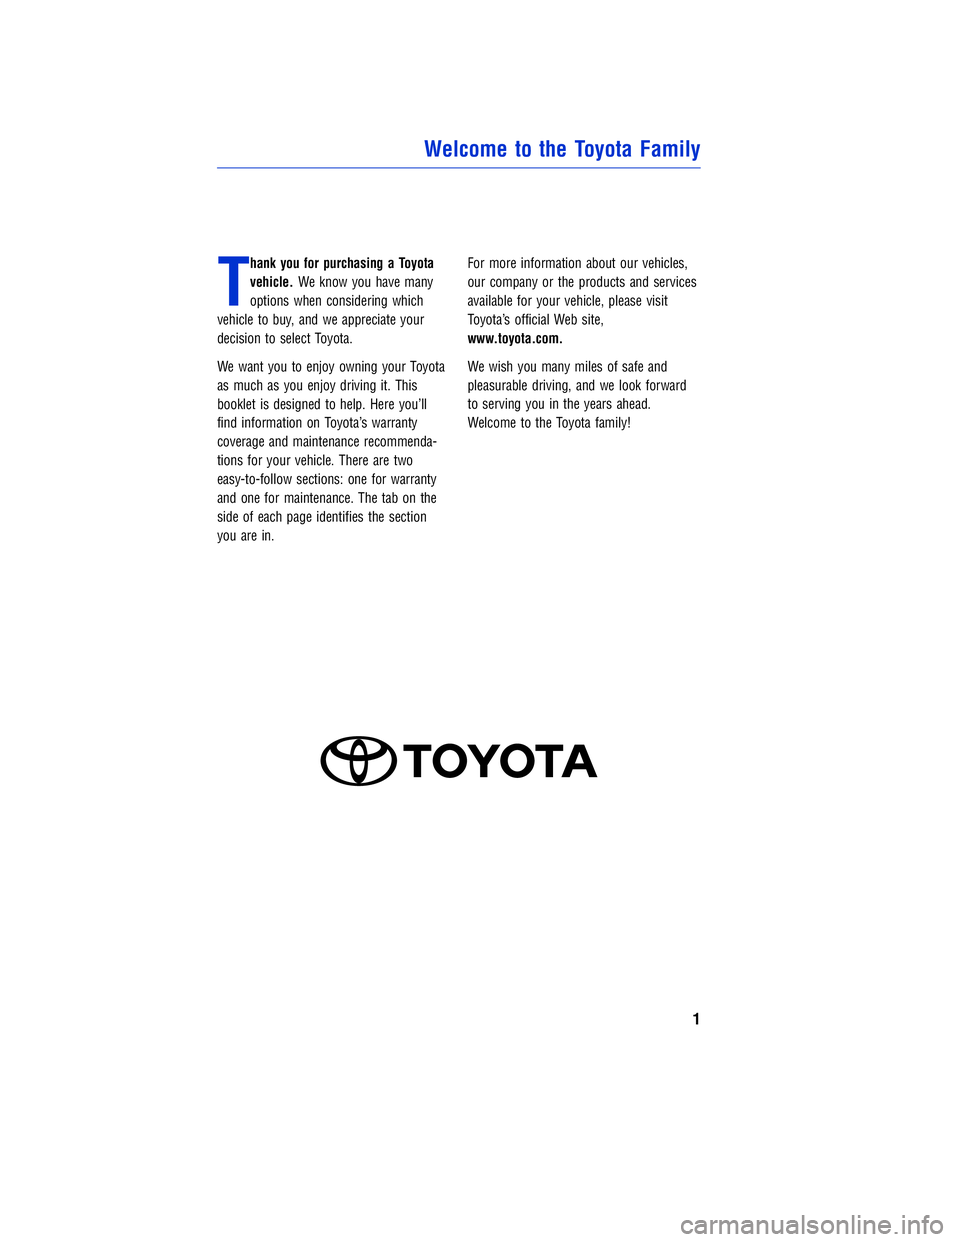 TOYOTA VENZA 2011  Warranties & Maintenance Guides (in English) JOBNAME: 317533-2011-ven-toyw PAGE: 1 SESS: 11 OUTPUT: Mon Sep 13 18:18:36 2010
/tweddle/toyota/sched-maint/317533-en-ven/wg
T
hank you for purchasing a Toyota
vehicle.We know you have many
options wh